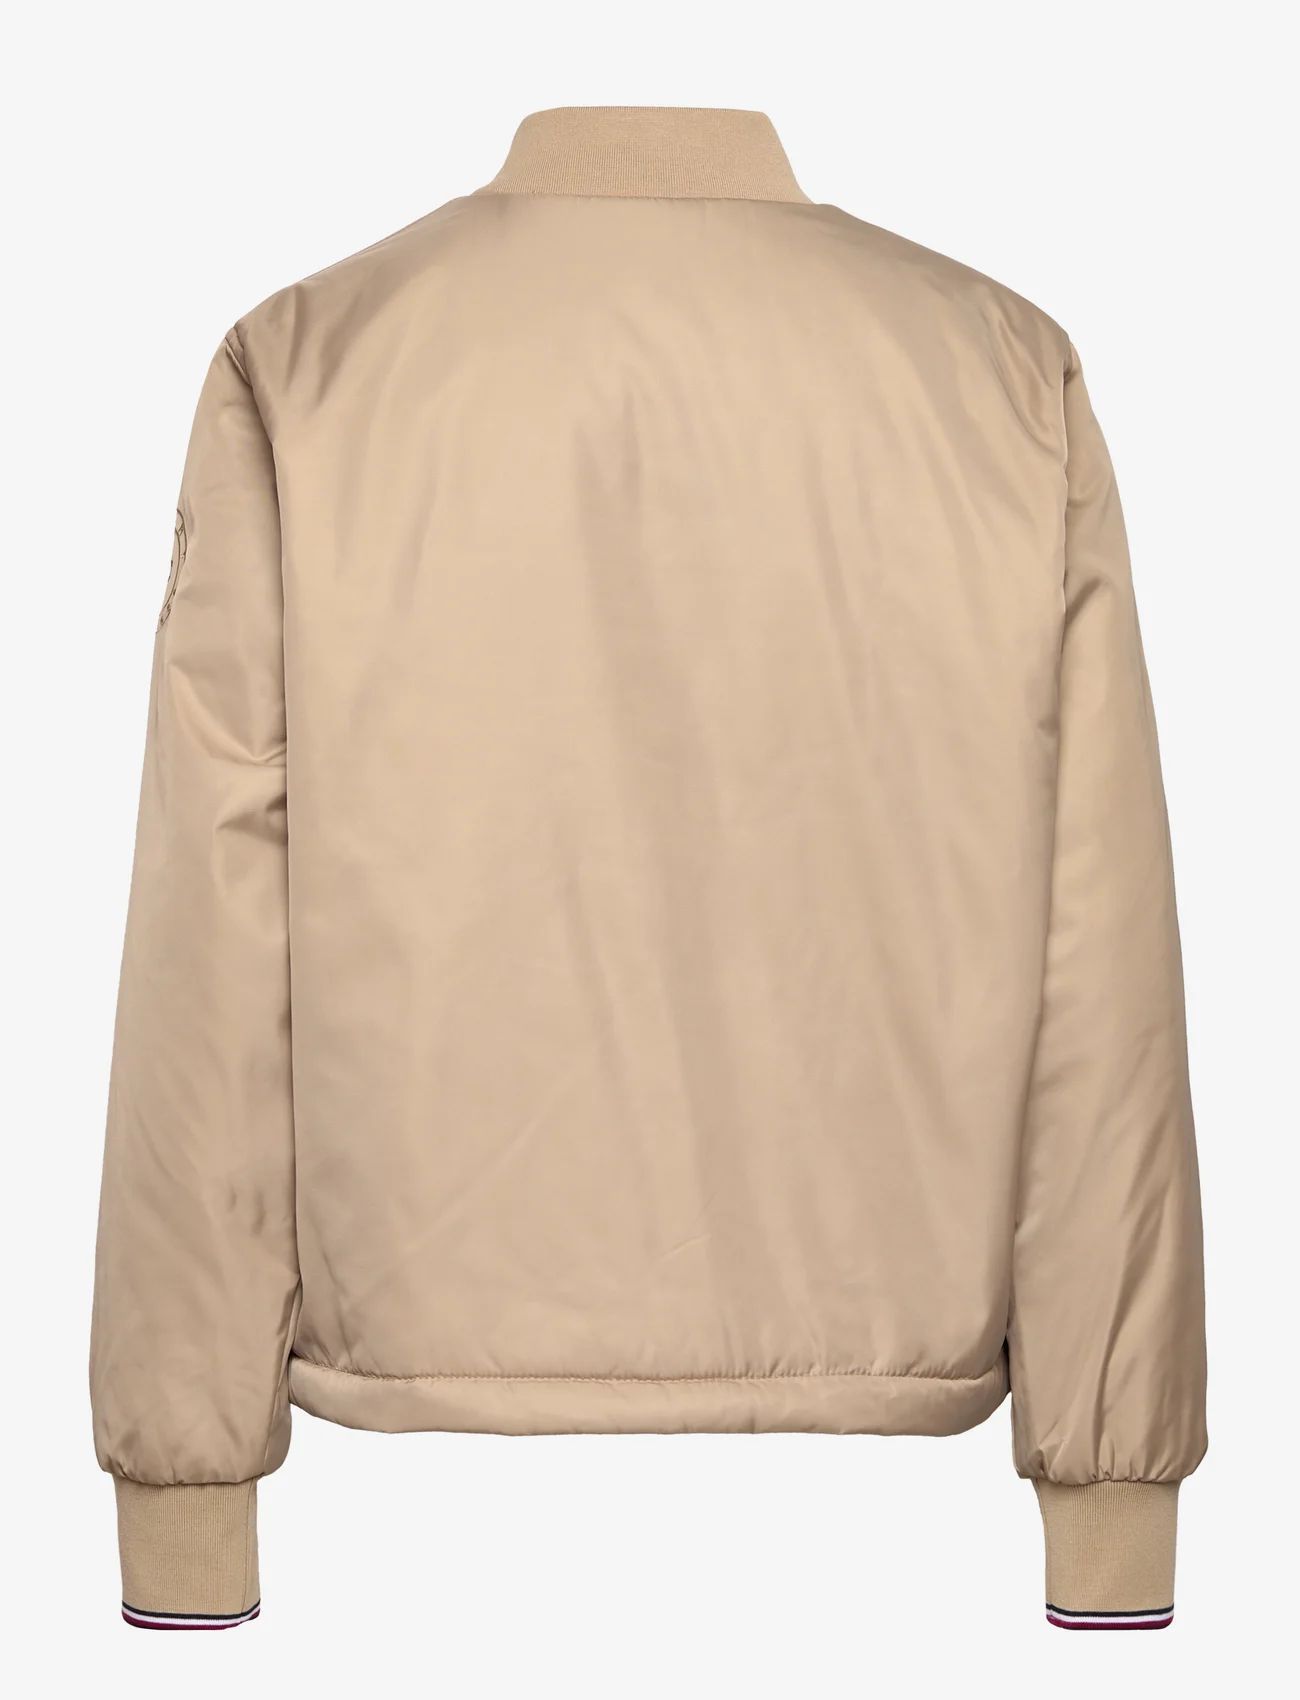 Tommy Hilfiger - CLEAN PADDED GS BOMBER - tunna jackor - beige - 1